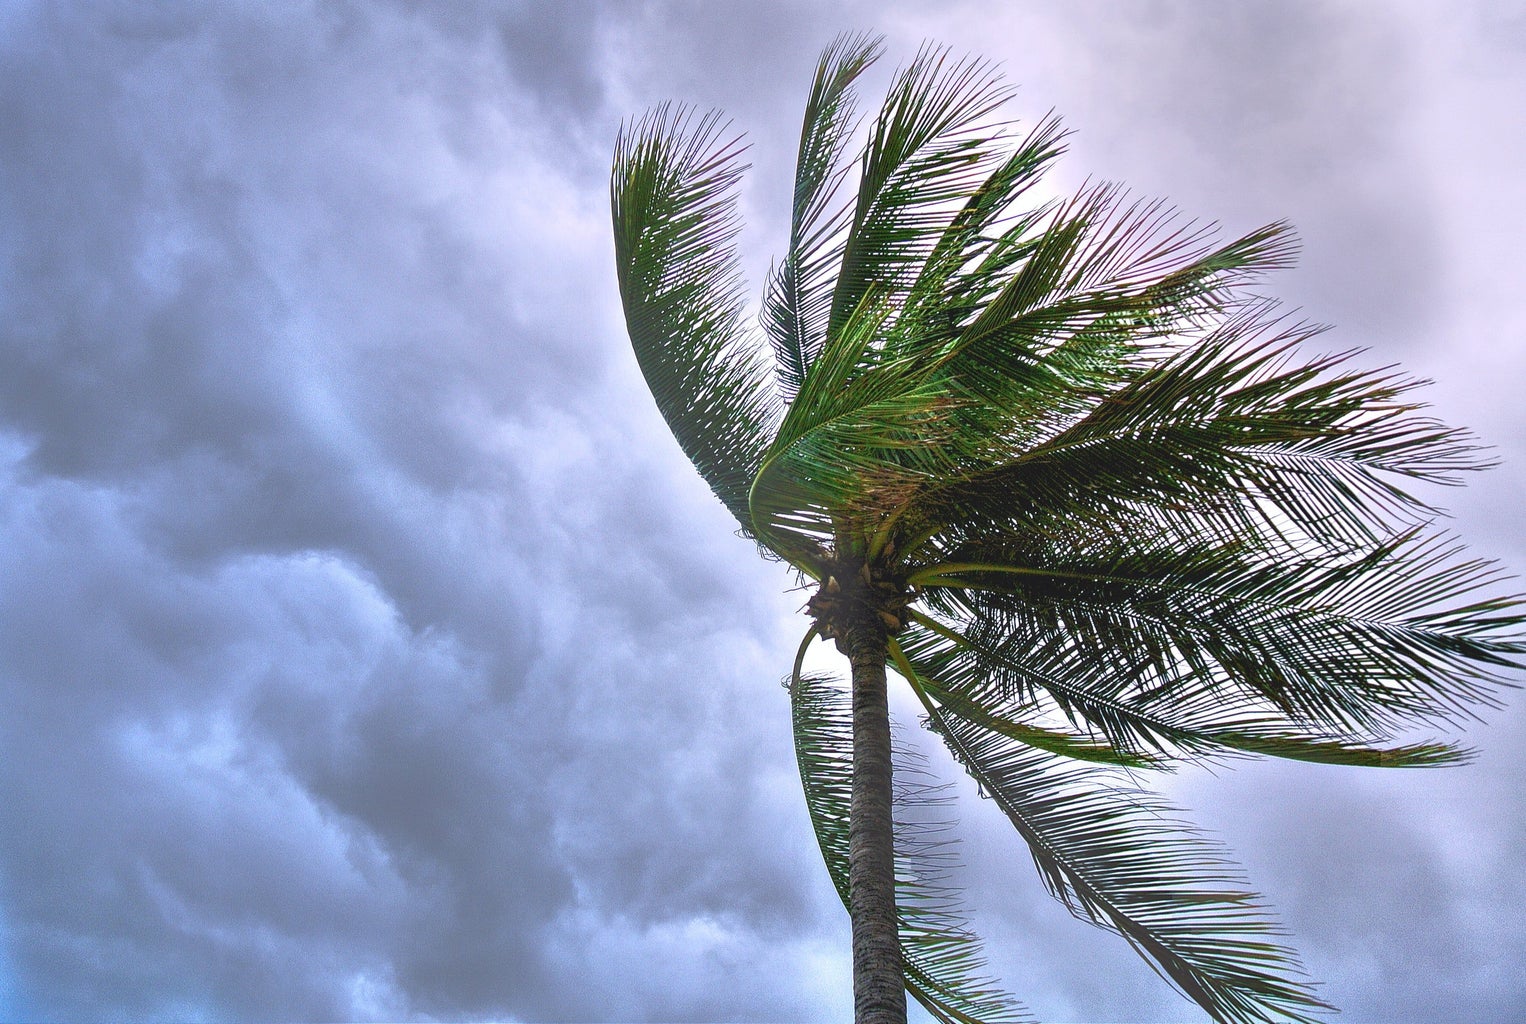 Palm tree in front of stormy sky